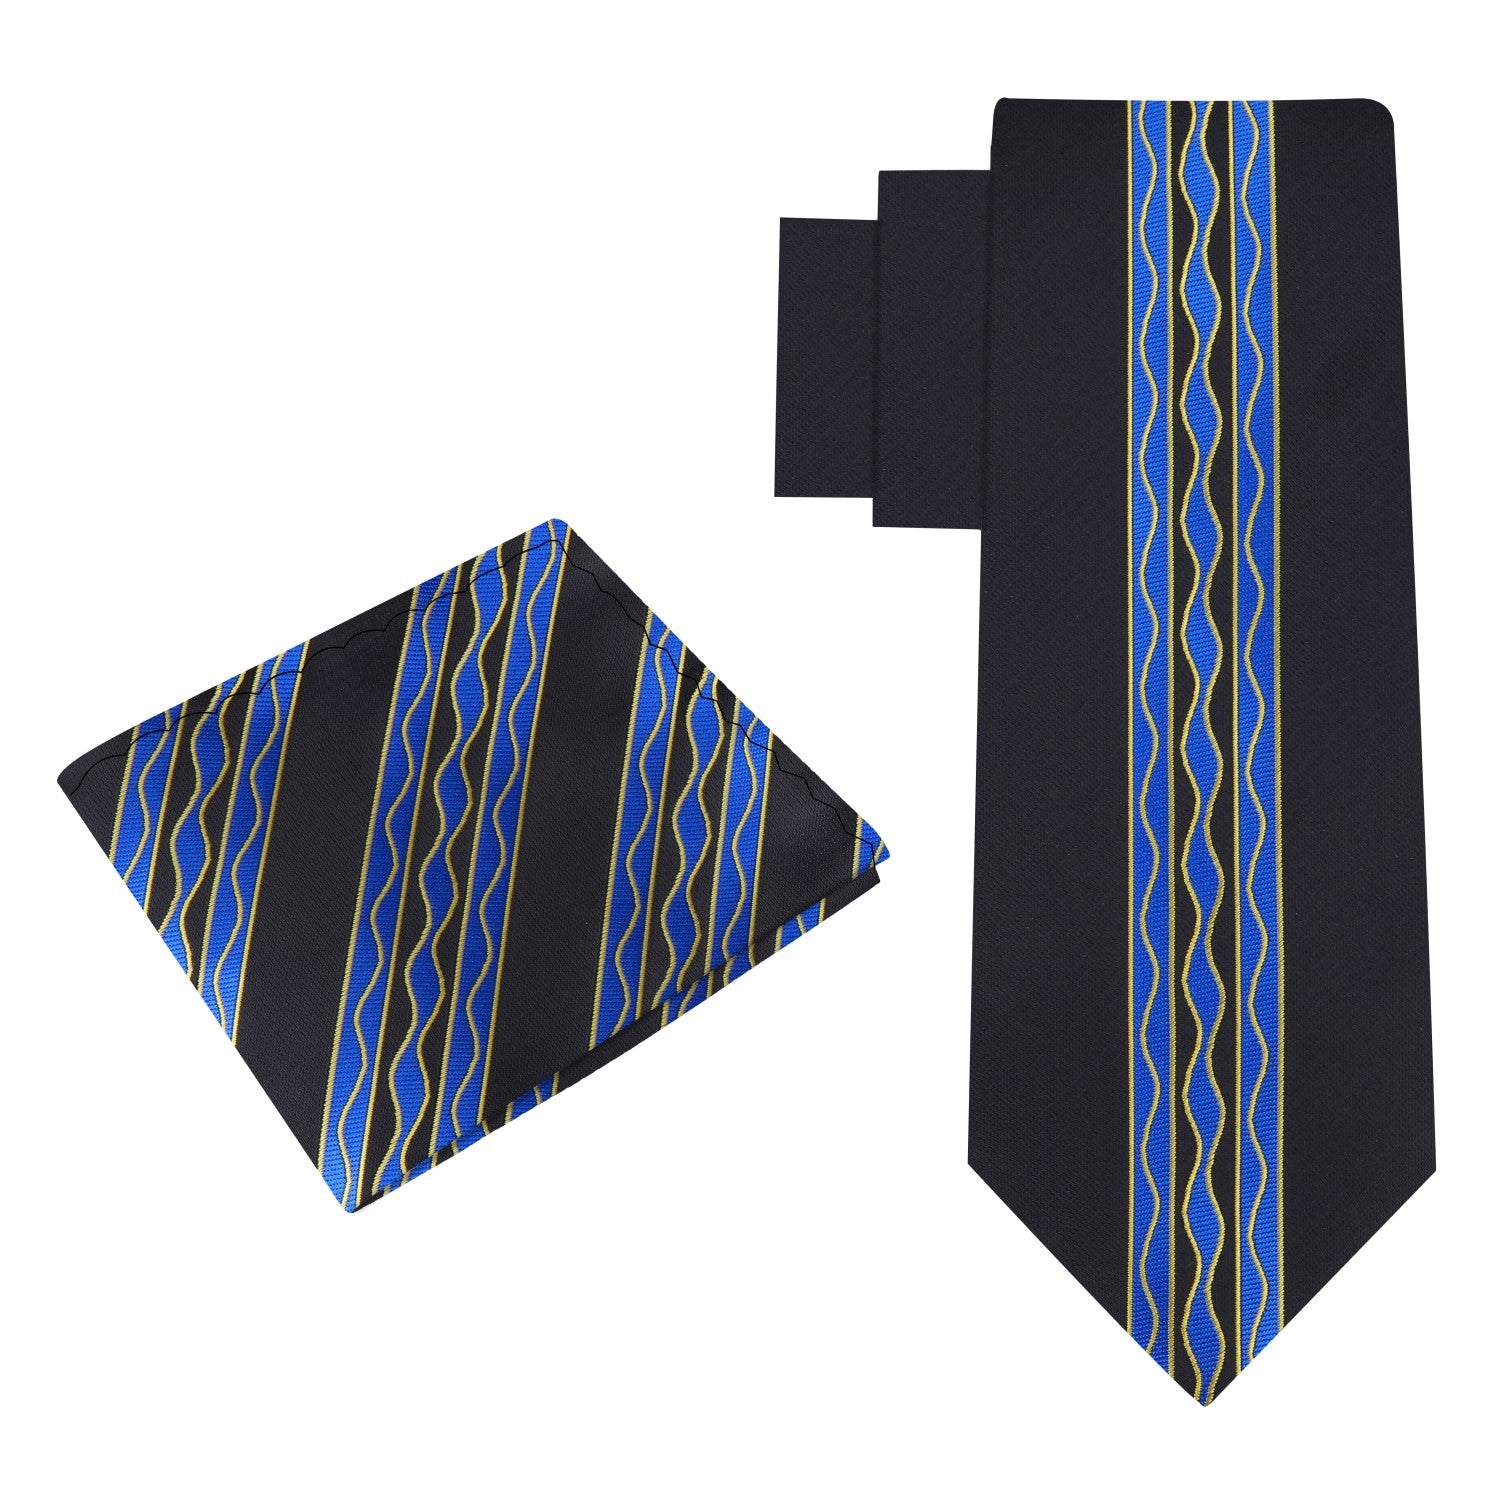 Alt View: Black, Light Blue, Yellow Wavy Lines Tie and Pocket Square